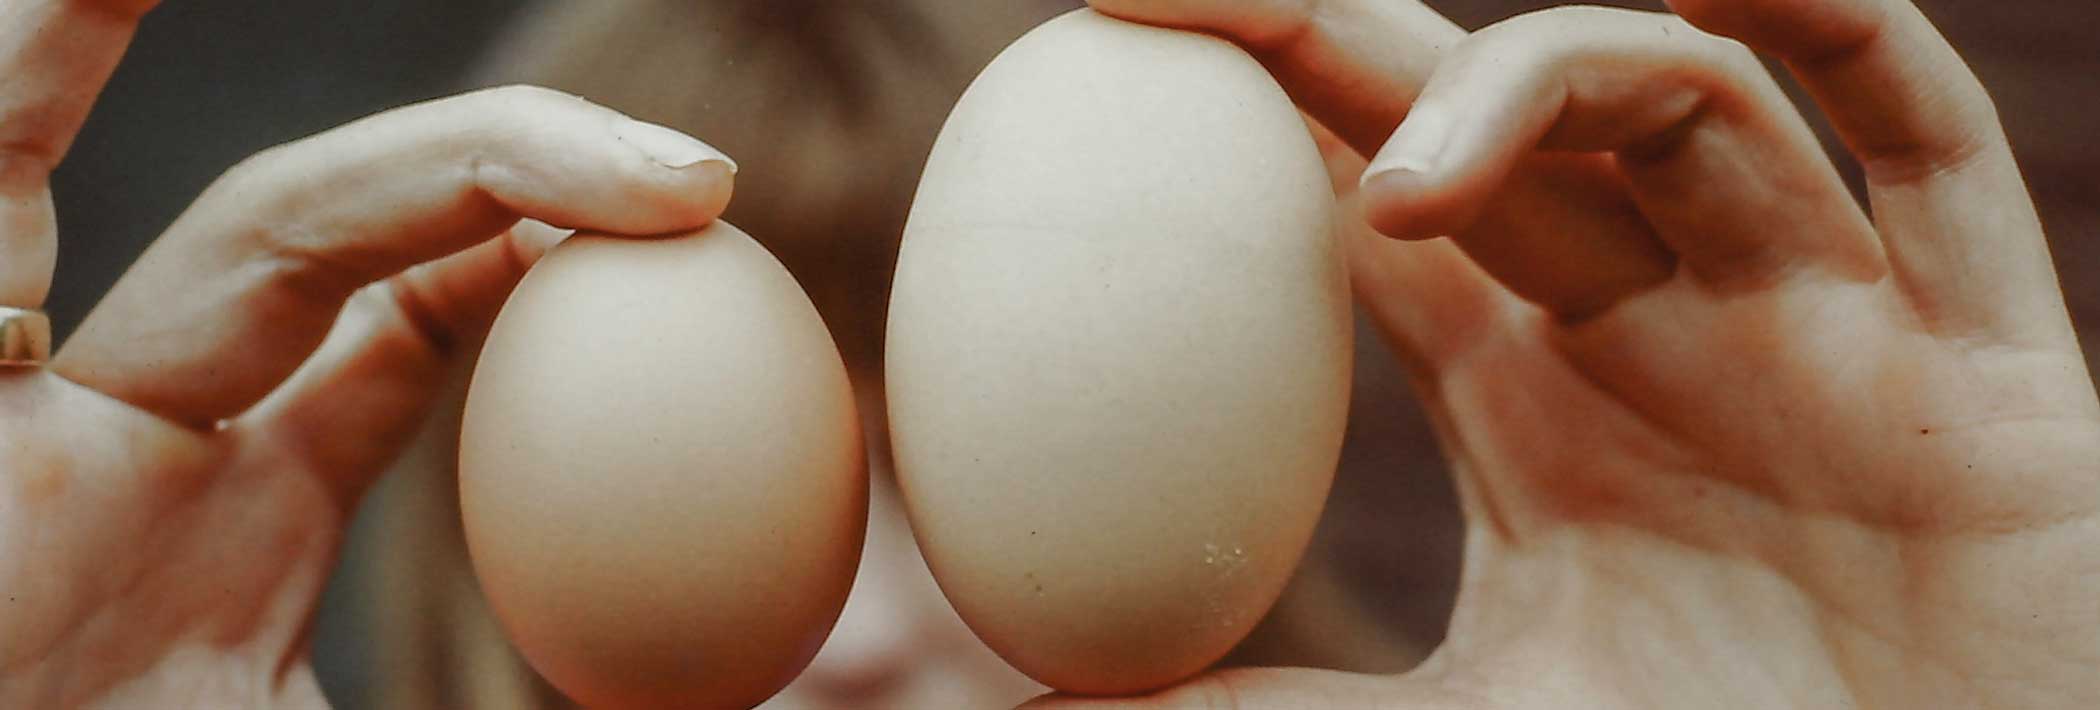 Comparison of two different sized eggs